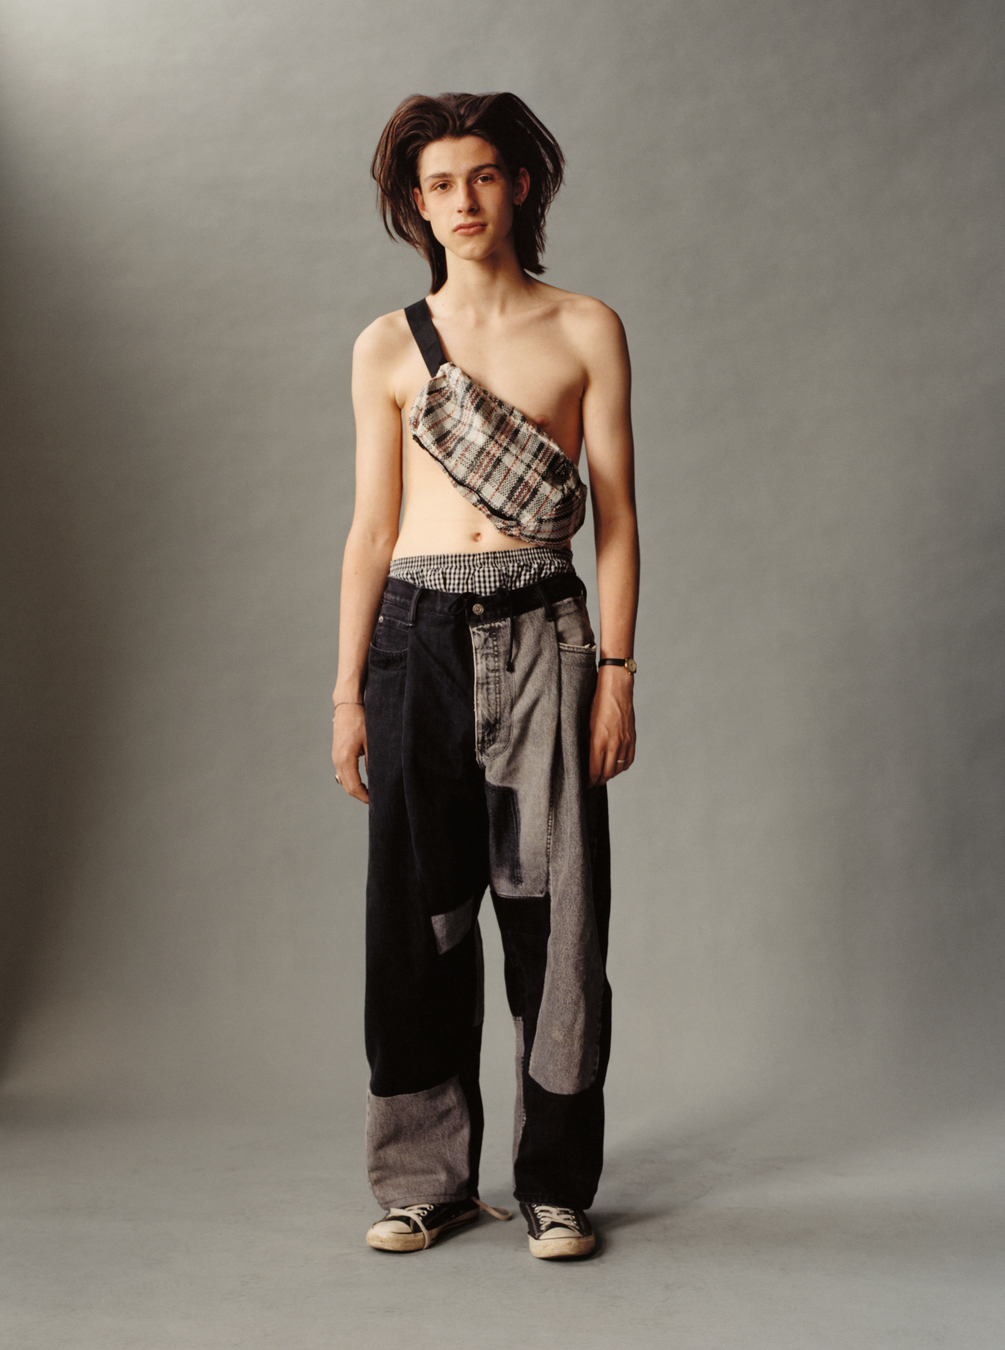 Lola + Pani photograph of a shirtless young model wearing patchwork jeans and a crossbody bag